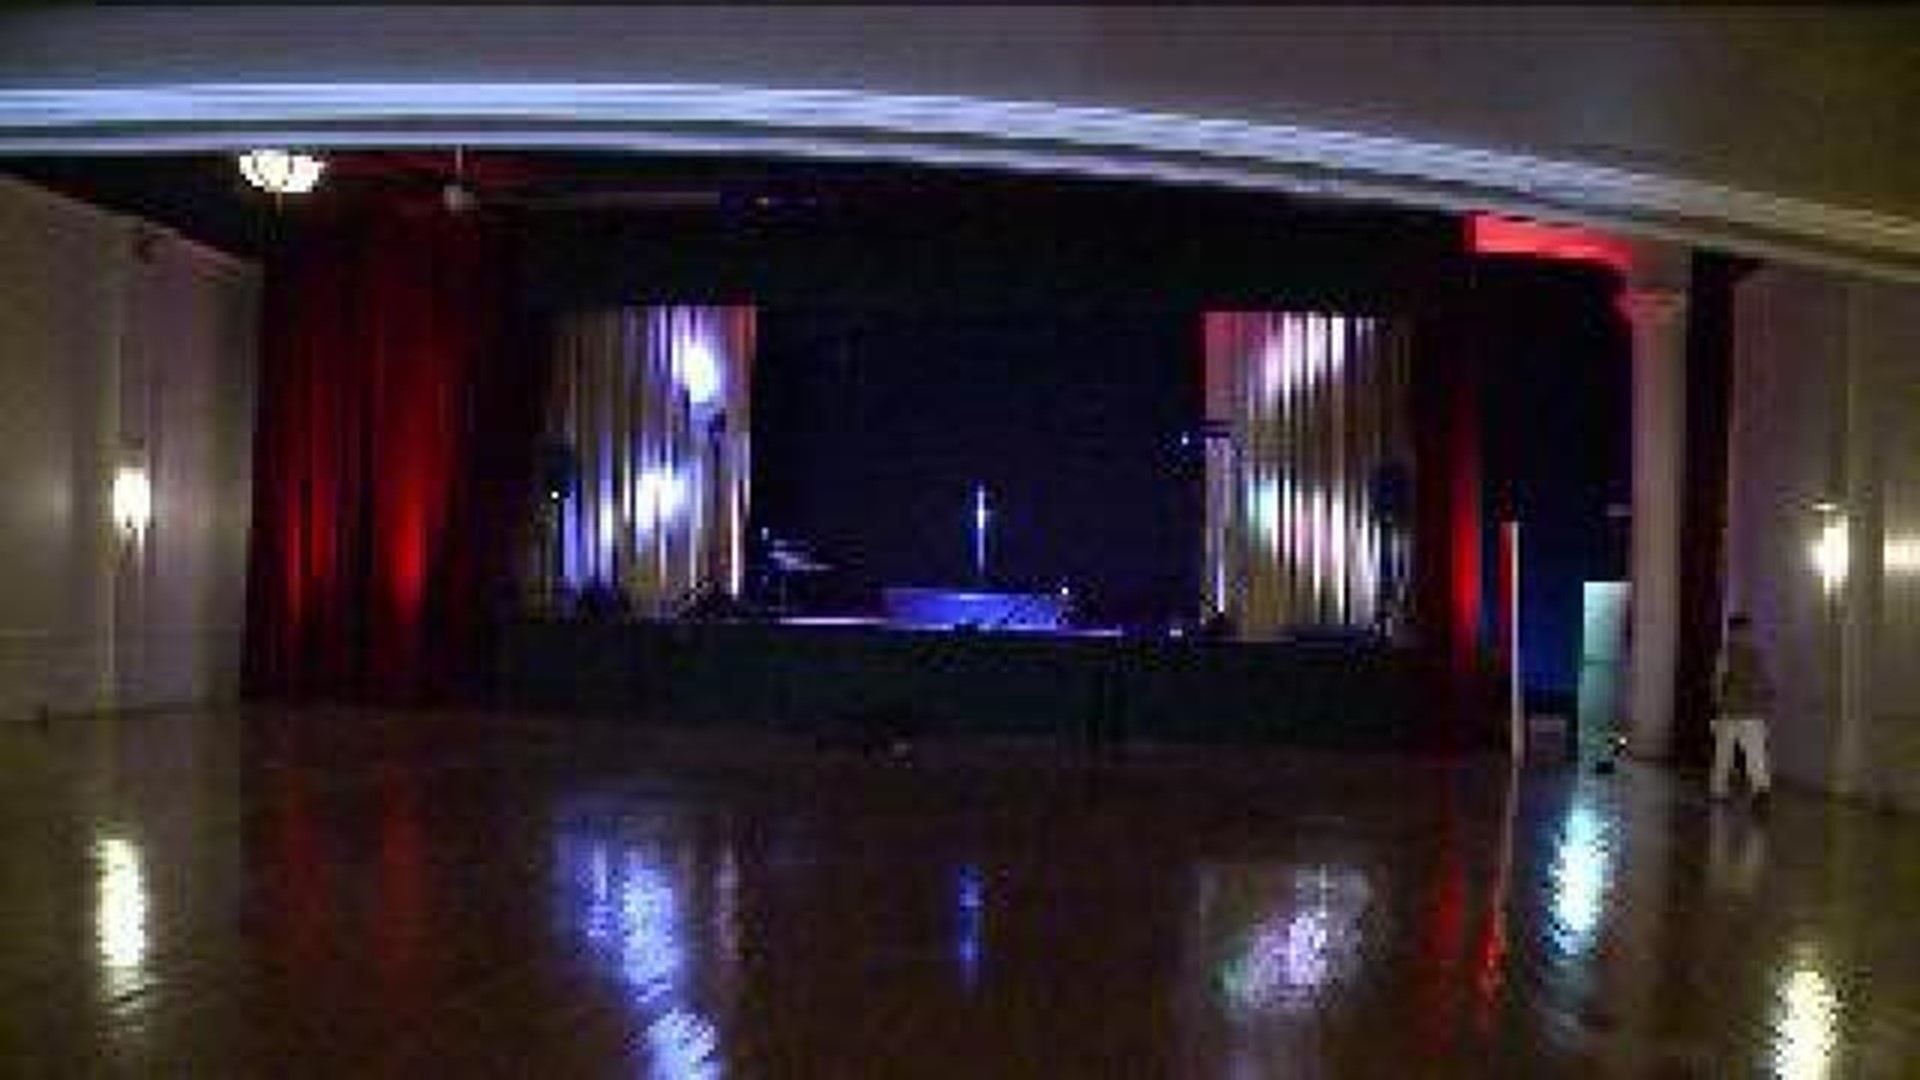 Moonshine Theatre To Reopen With New Name